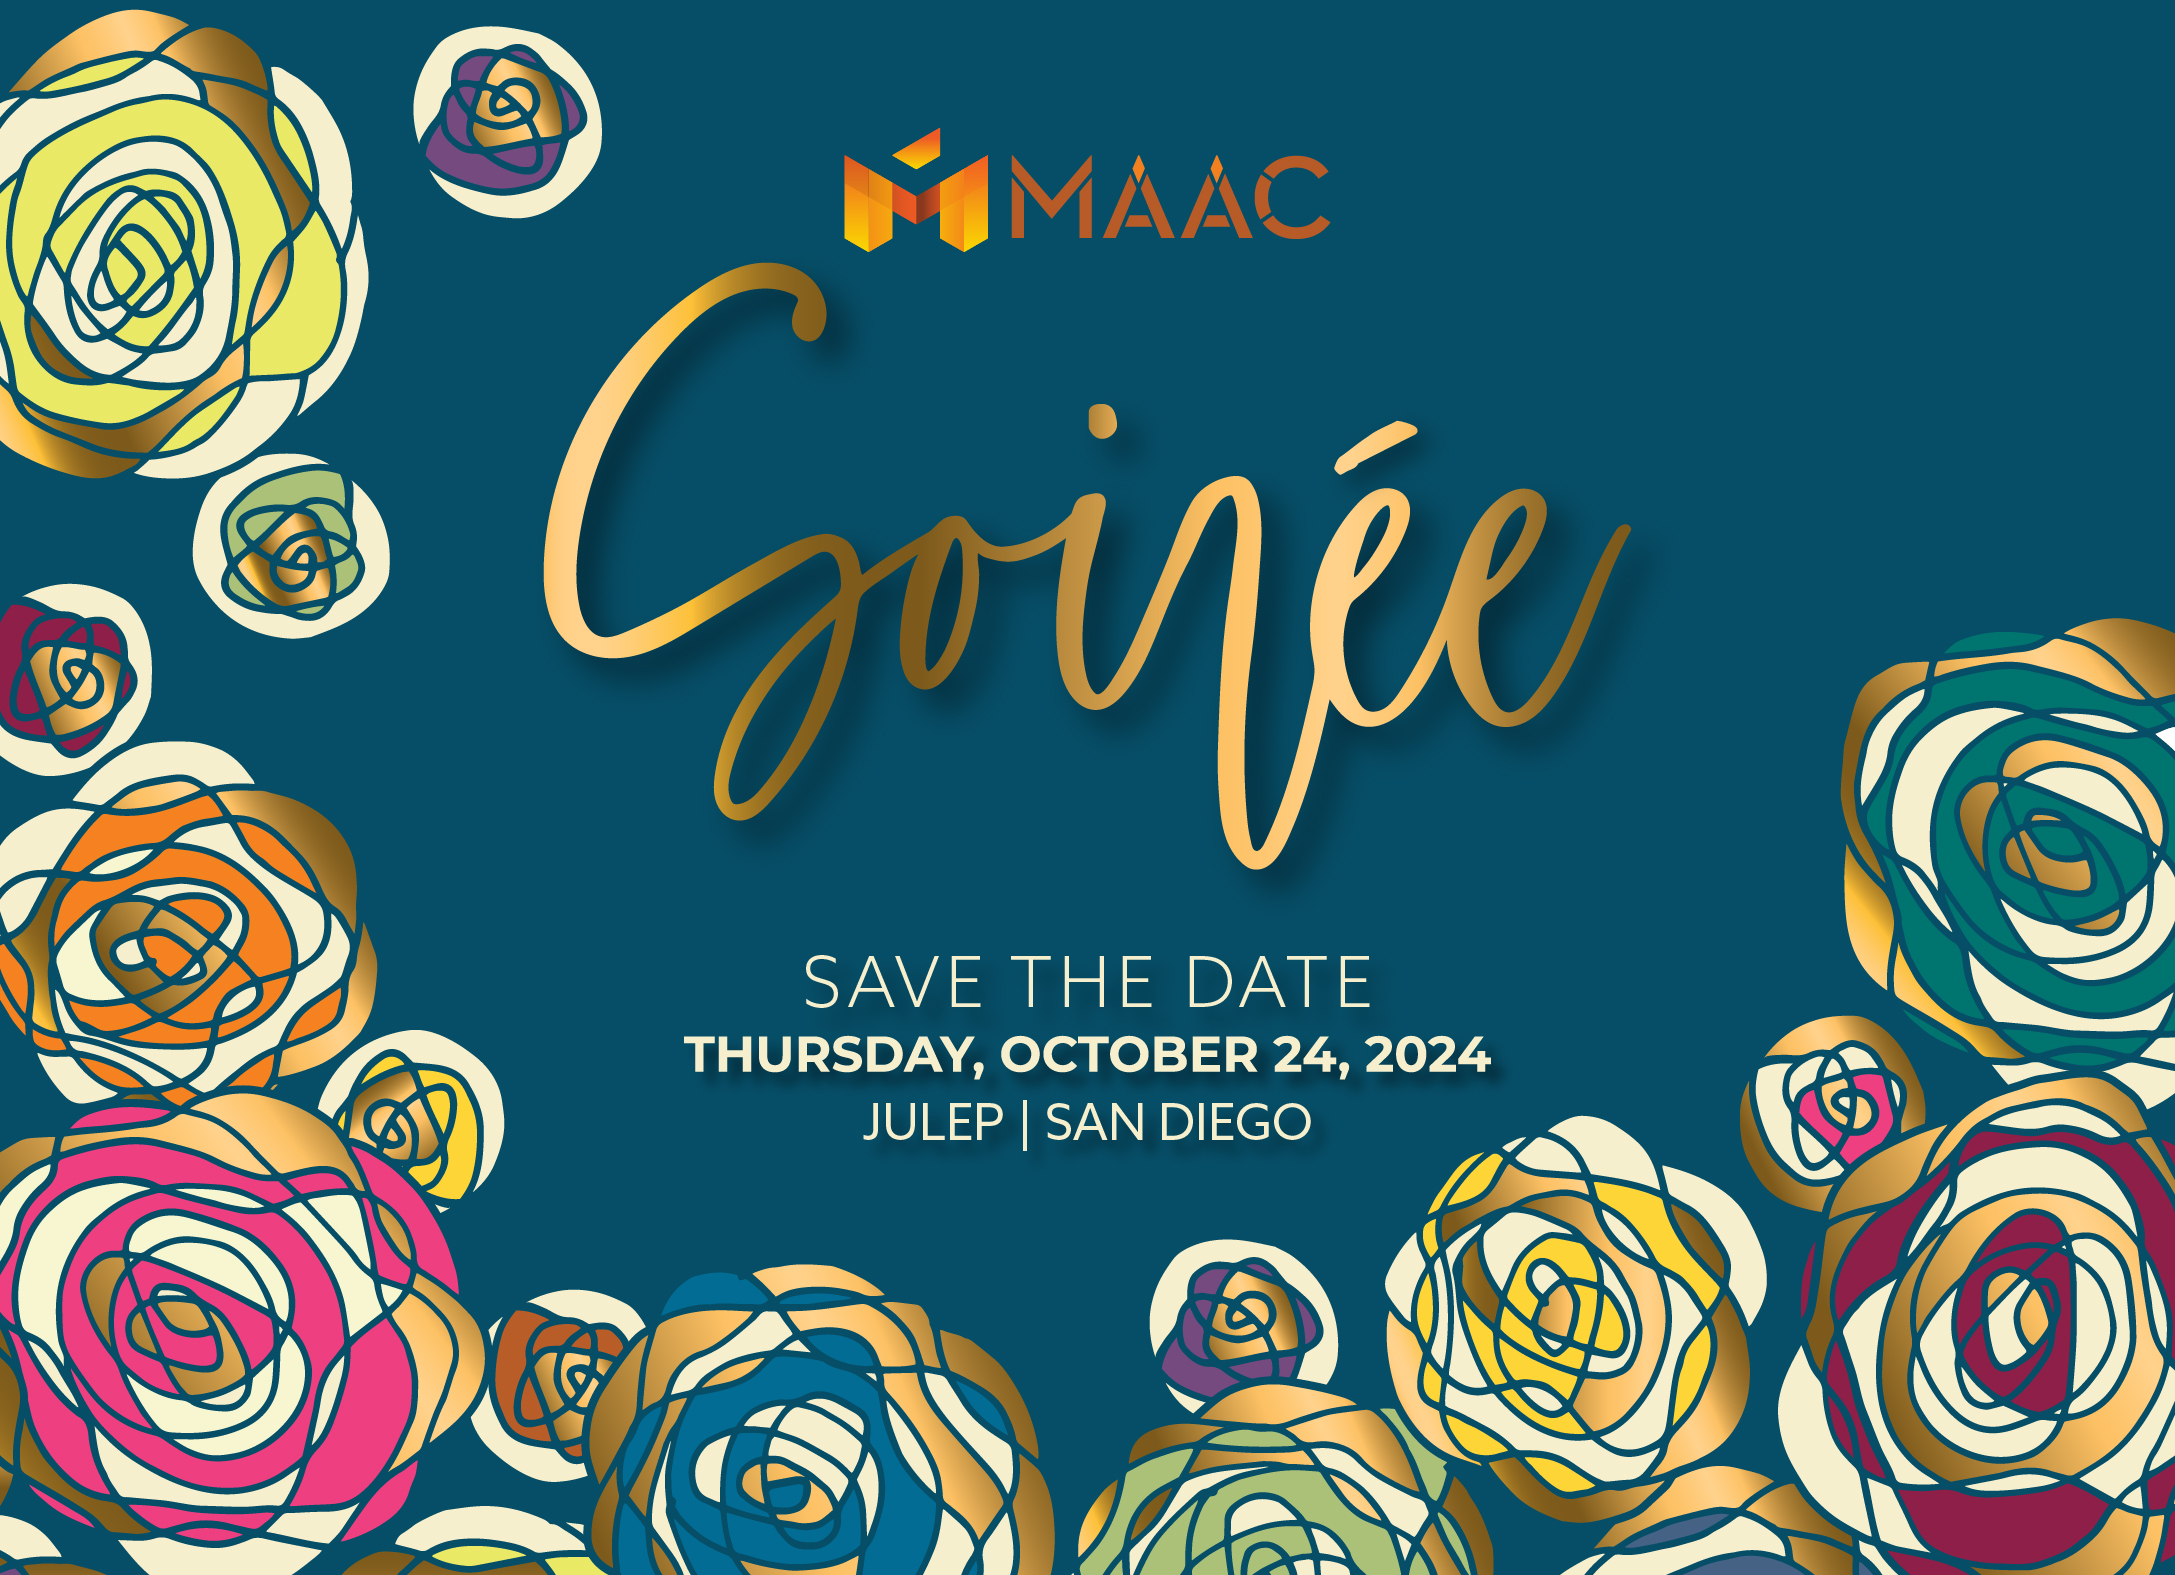 MAAC Soiree 2024 Save the Date flyer